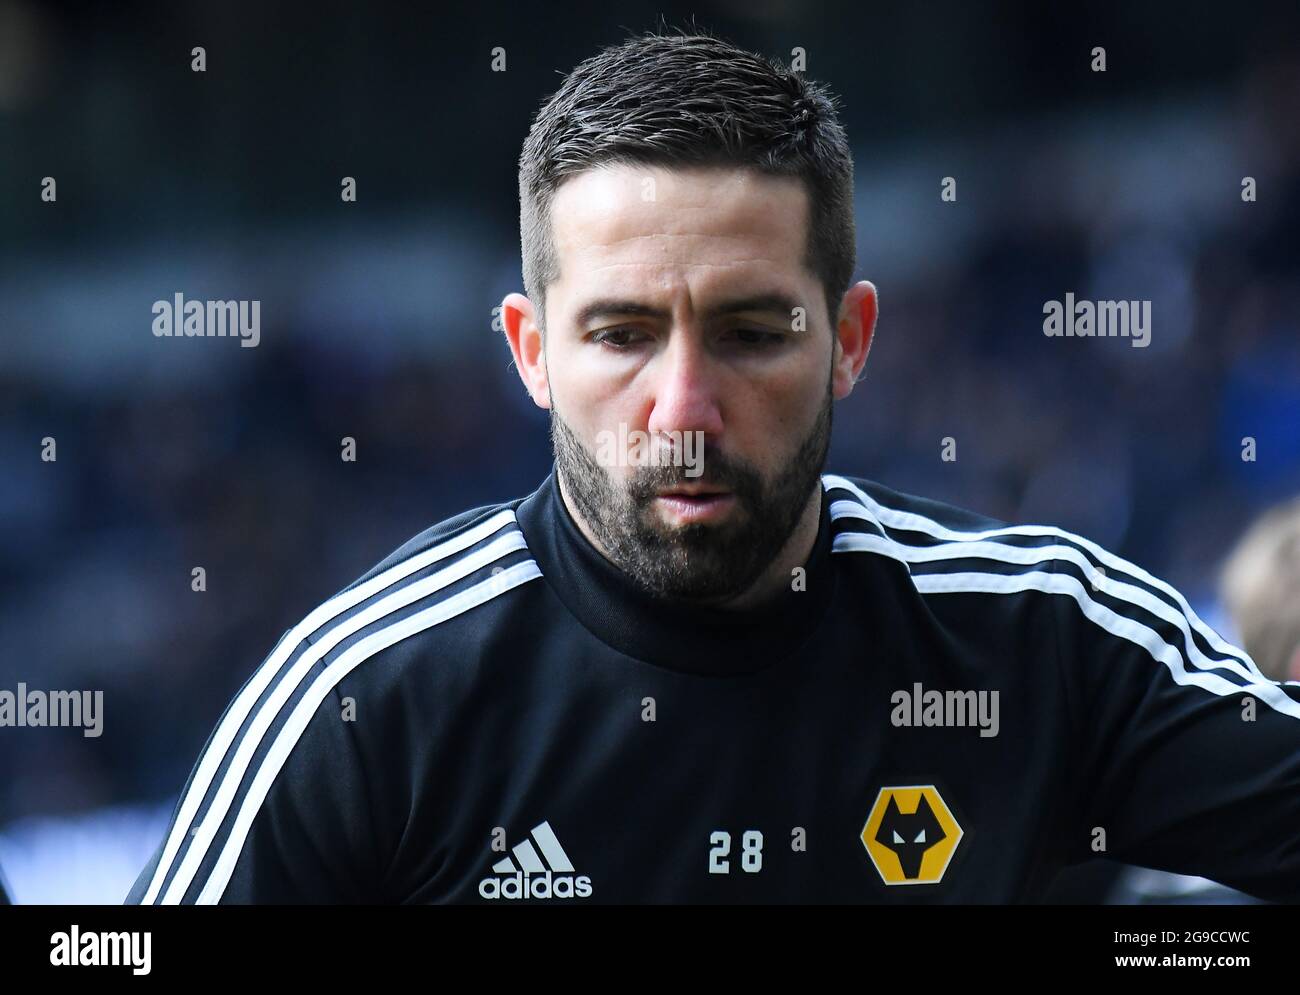 LONDON, ENGLAND - MArch 1, 2020: Joao Moutinho of Wolverhampton pictured ahead of the 2020/21 Premier League game between Tottenham Hotspur FC and Wolverhampton FC at Tottenham Hotspur Stadium. Stock Photo